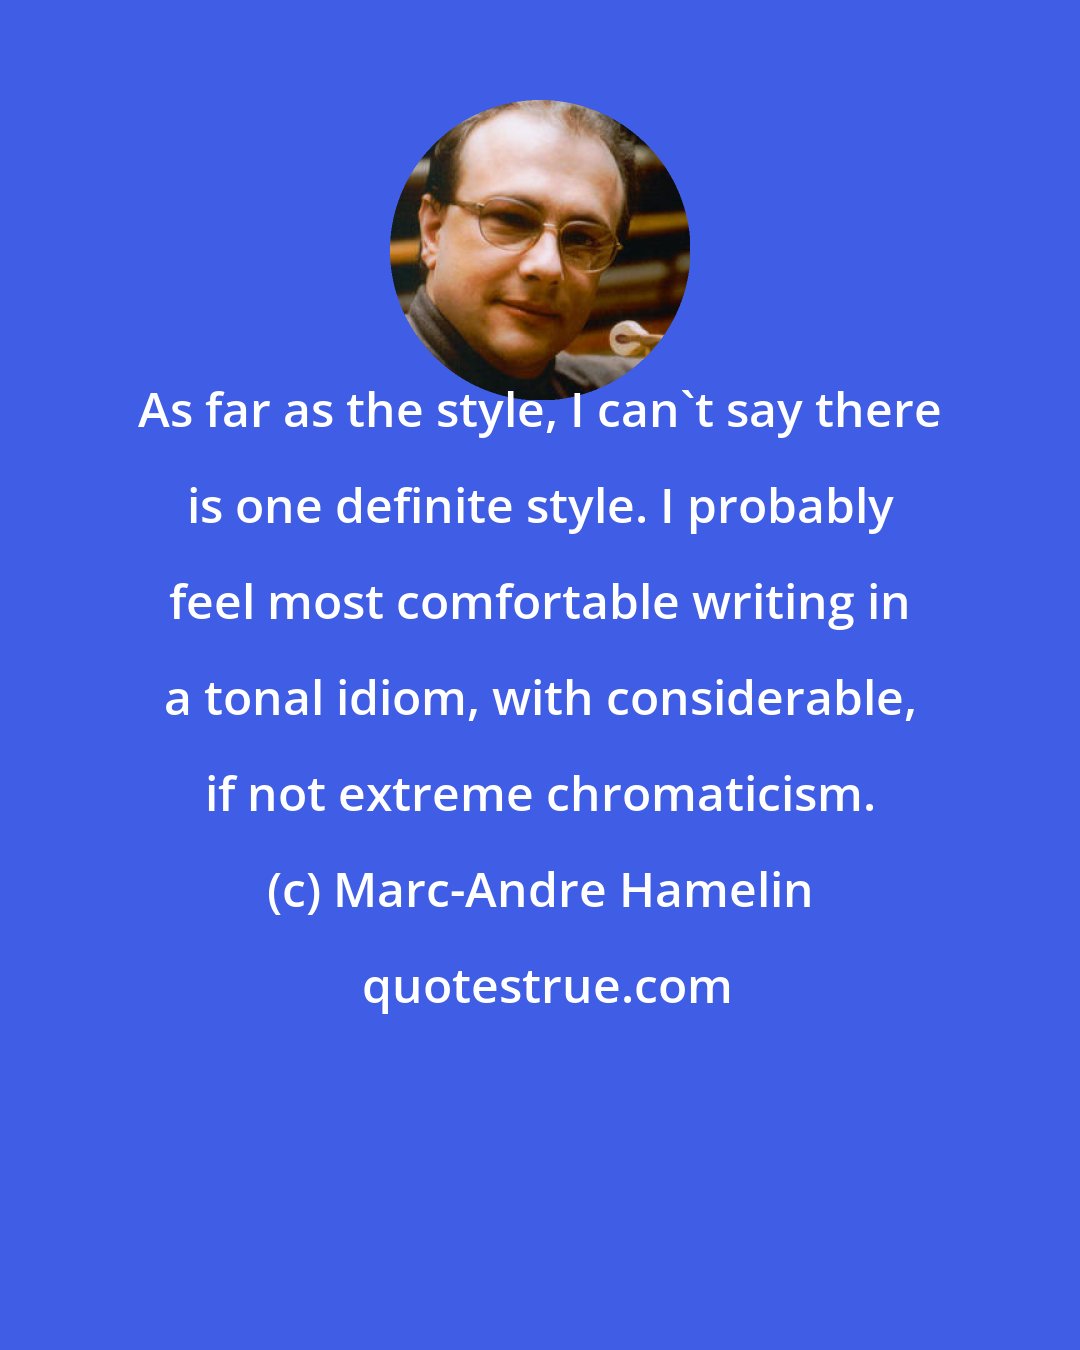 Marc-Andre Hamelin: As far as the style, I can't say there is one definite style. I probably feel most comfortable writing in a tonal idiom, with considerable, if not extreme chromaticism.